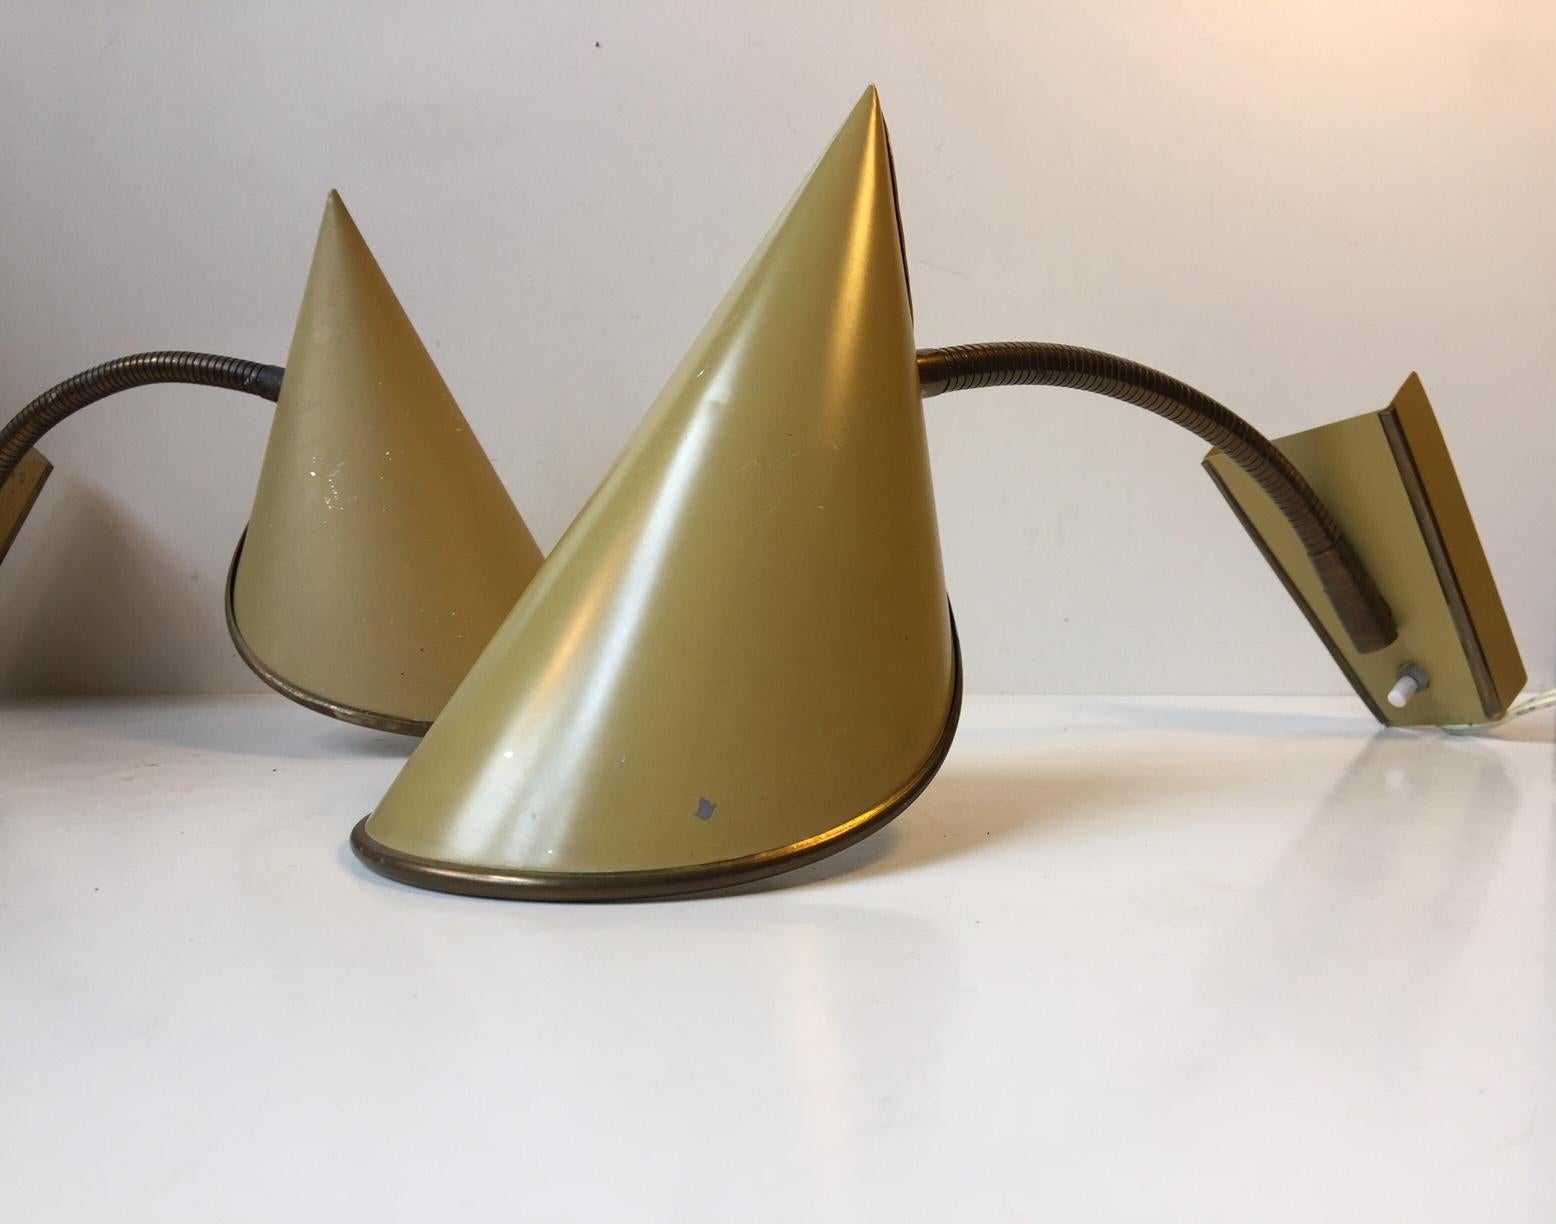 This pair of adjustable wall lights was manufactured and designed by Fog & Mørup in Denmark during the 1950s. The set features a folded and pointy yellow shades and a flexible fully adjustable brass goose-neck. The style of these lights was inspired